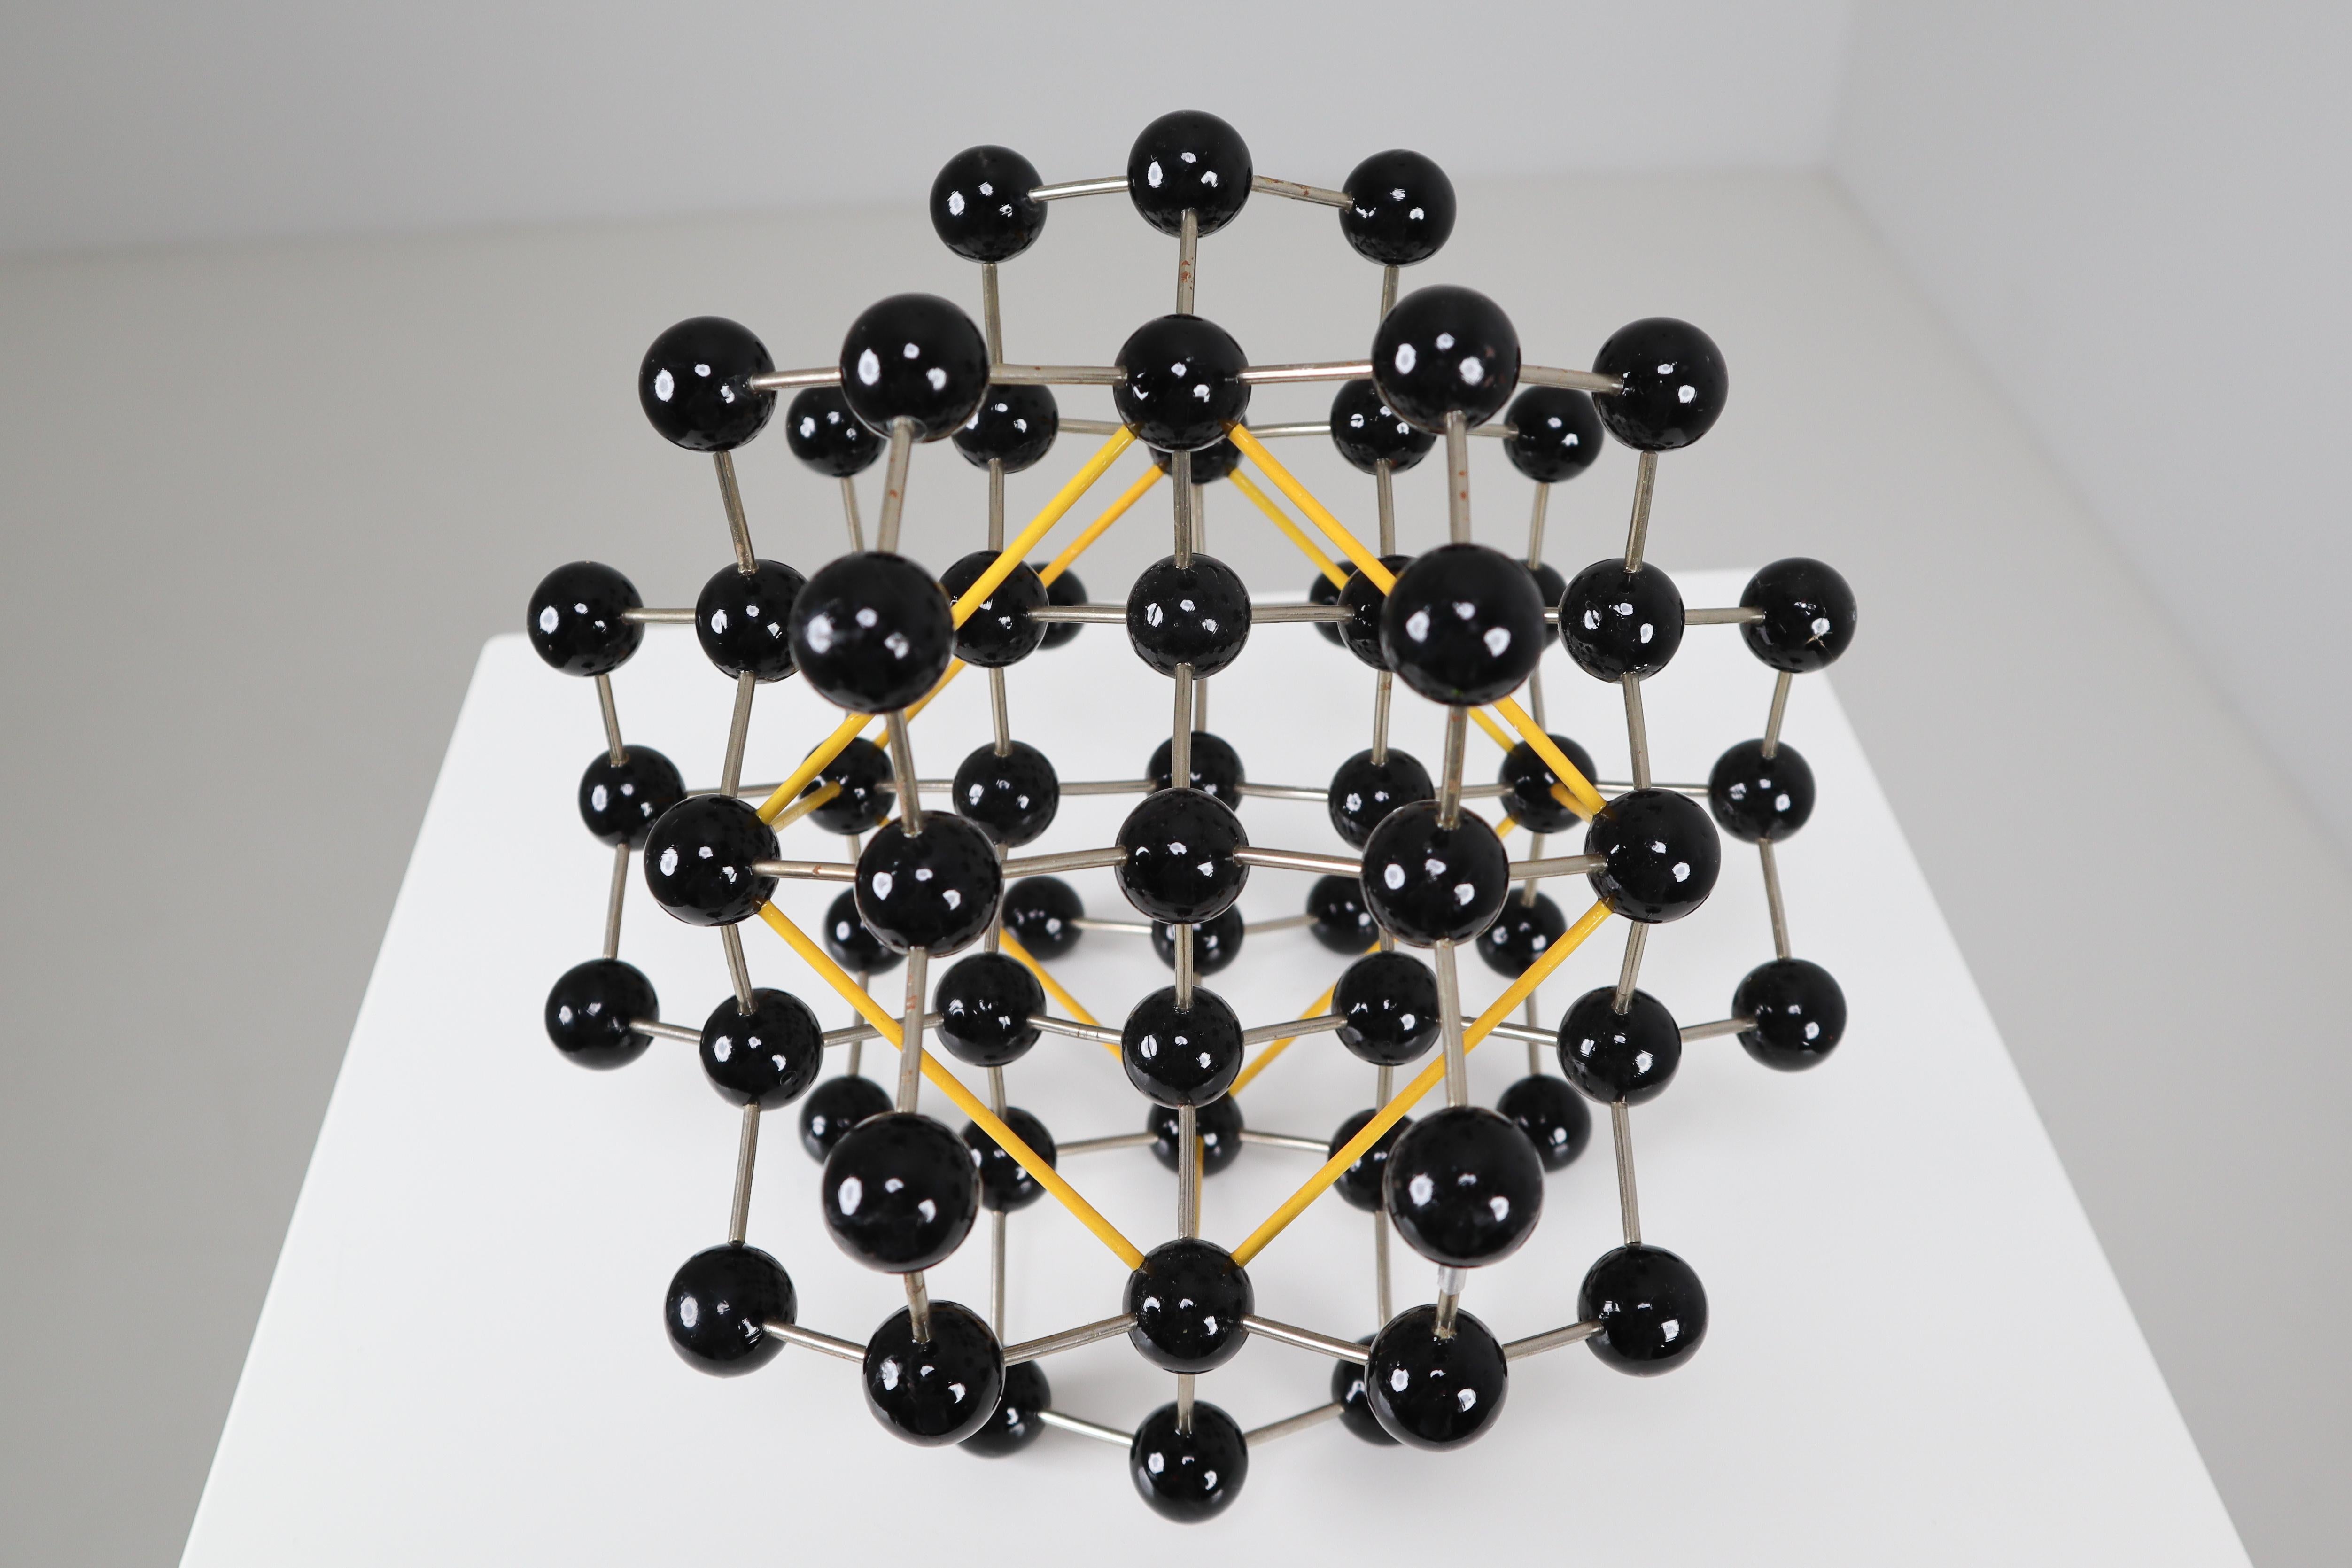 Czech Mid-Century Molecular Structure from Prague in Black and Yellow